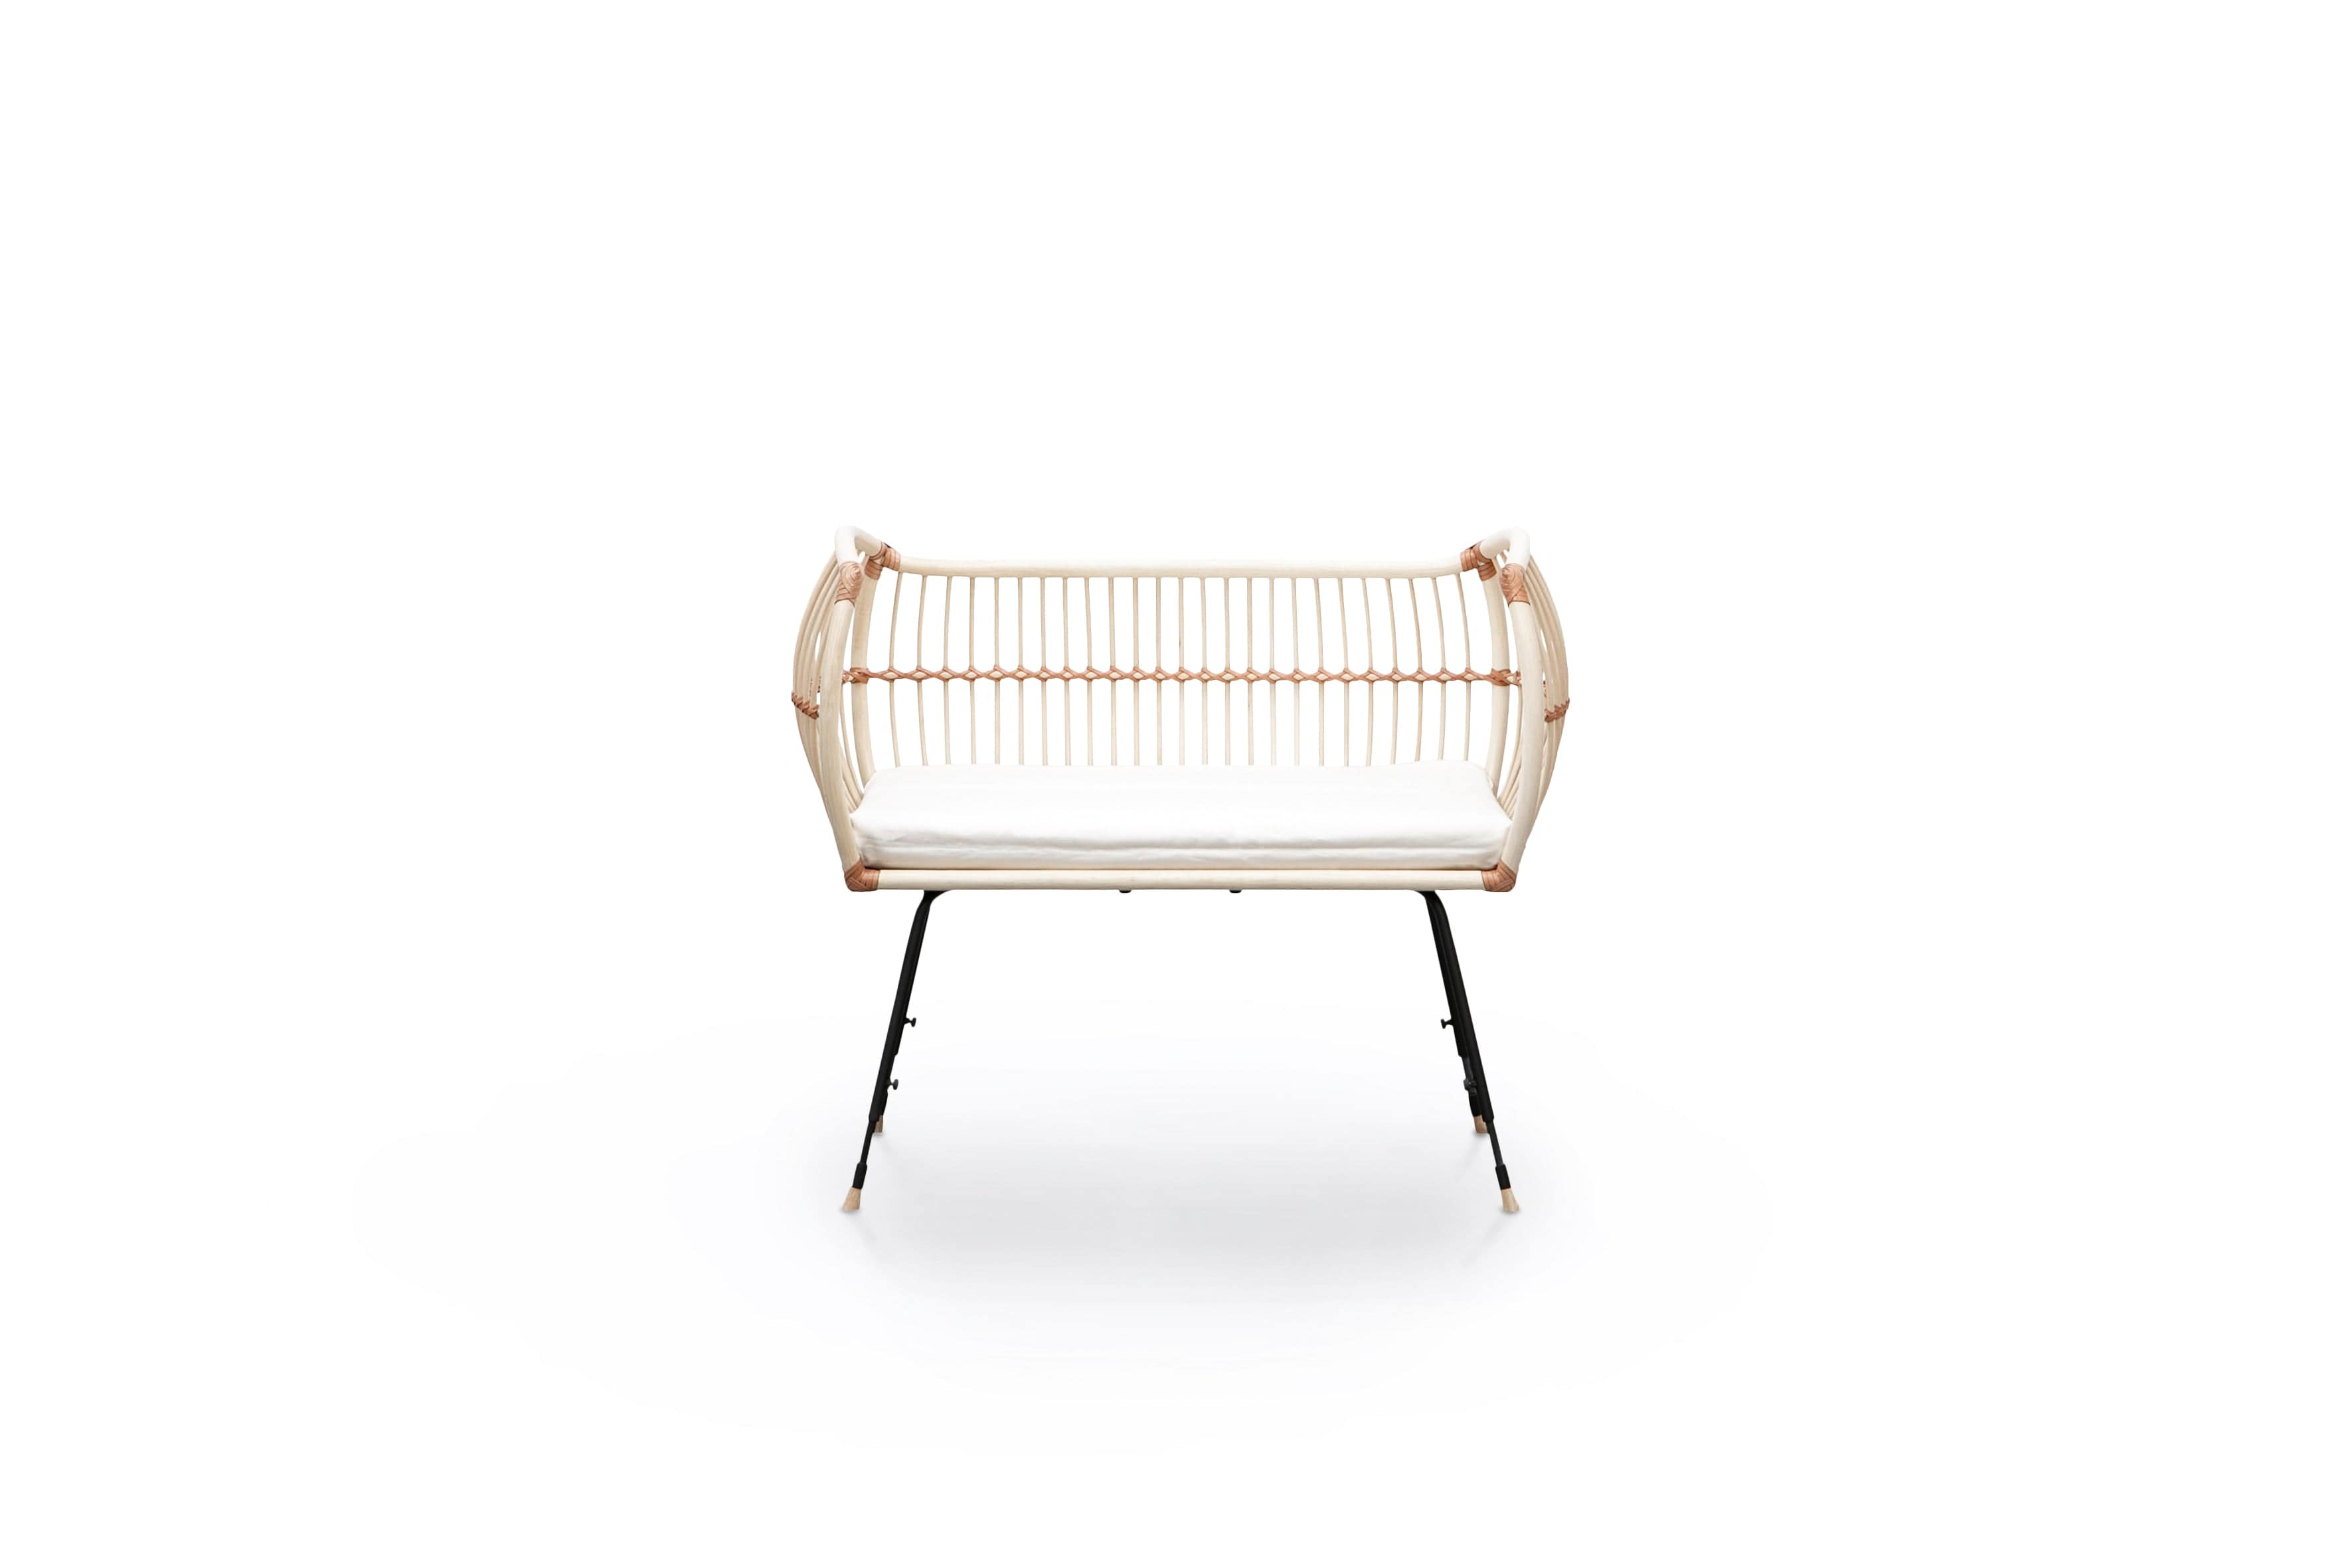 Square bed with outwards curved basket, open on one side. Made of light beige rattan beams, connected with light brown leather straps and standing on slim black metal legs. 